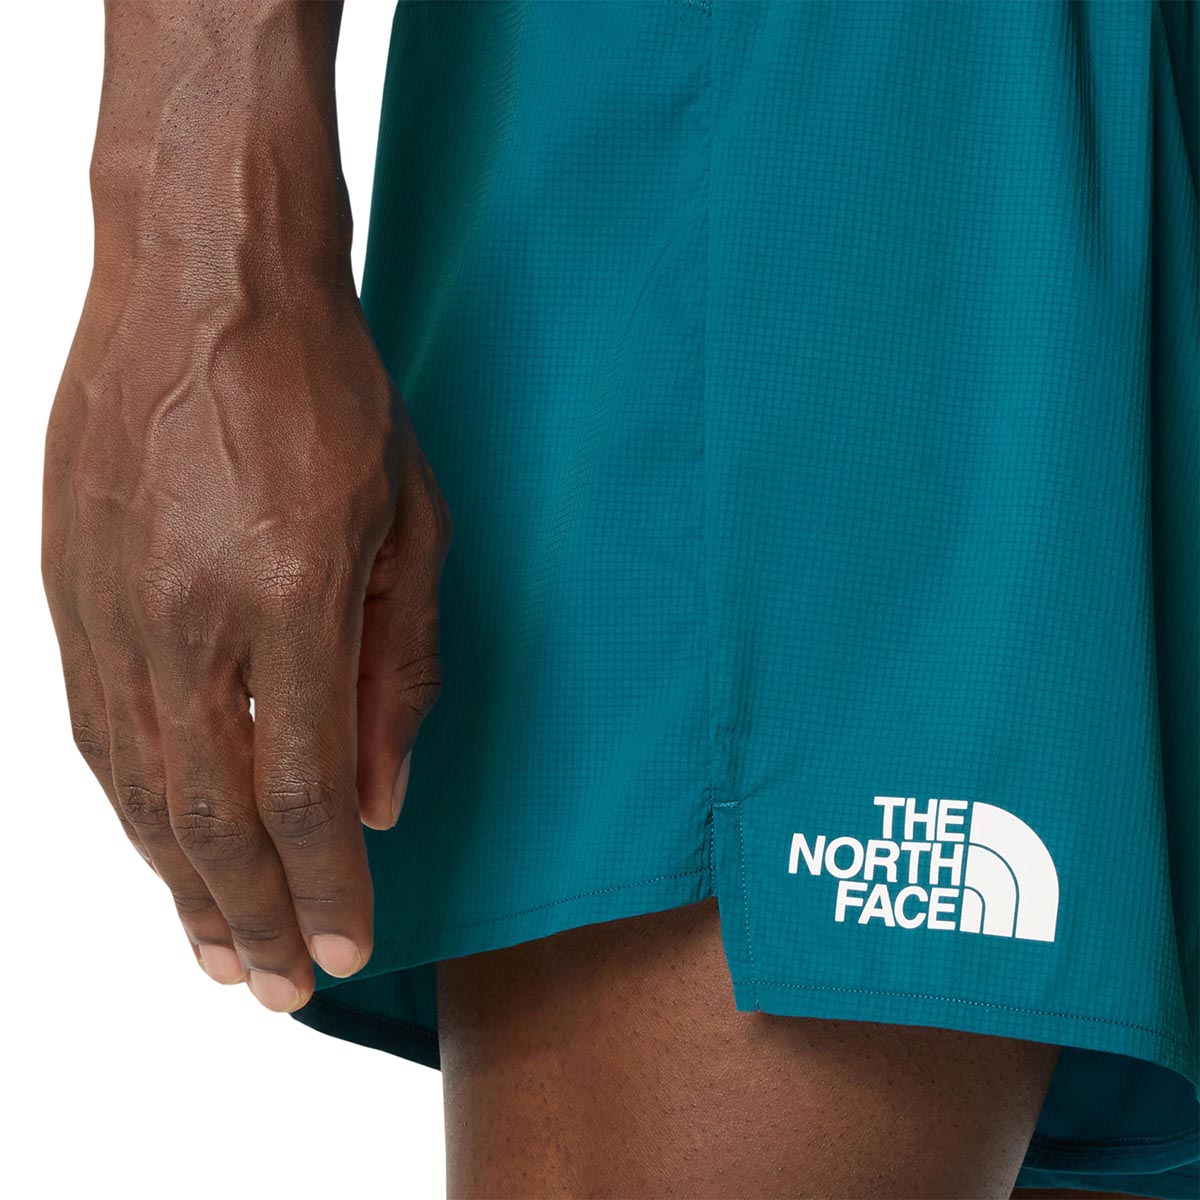 THE NORTH FACE - SUMMIT PACESETTER 5